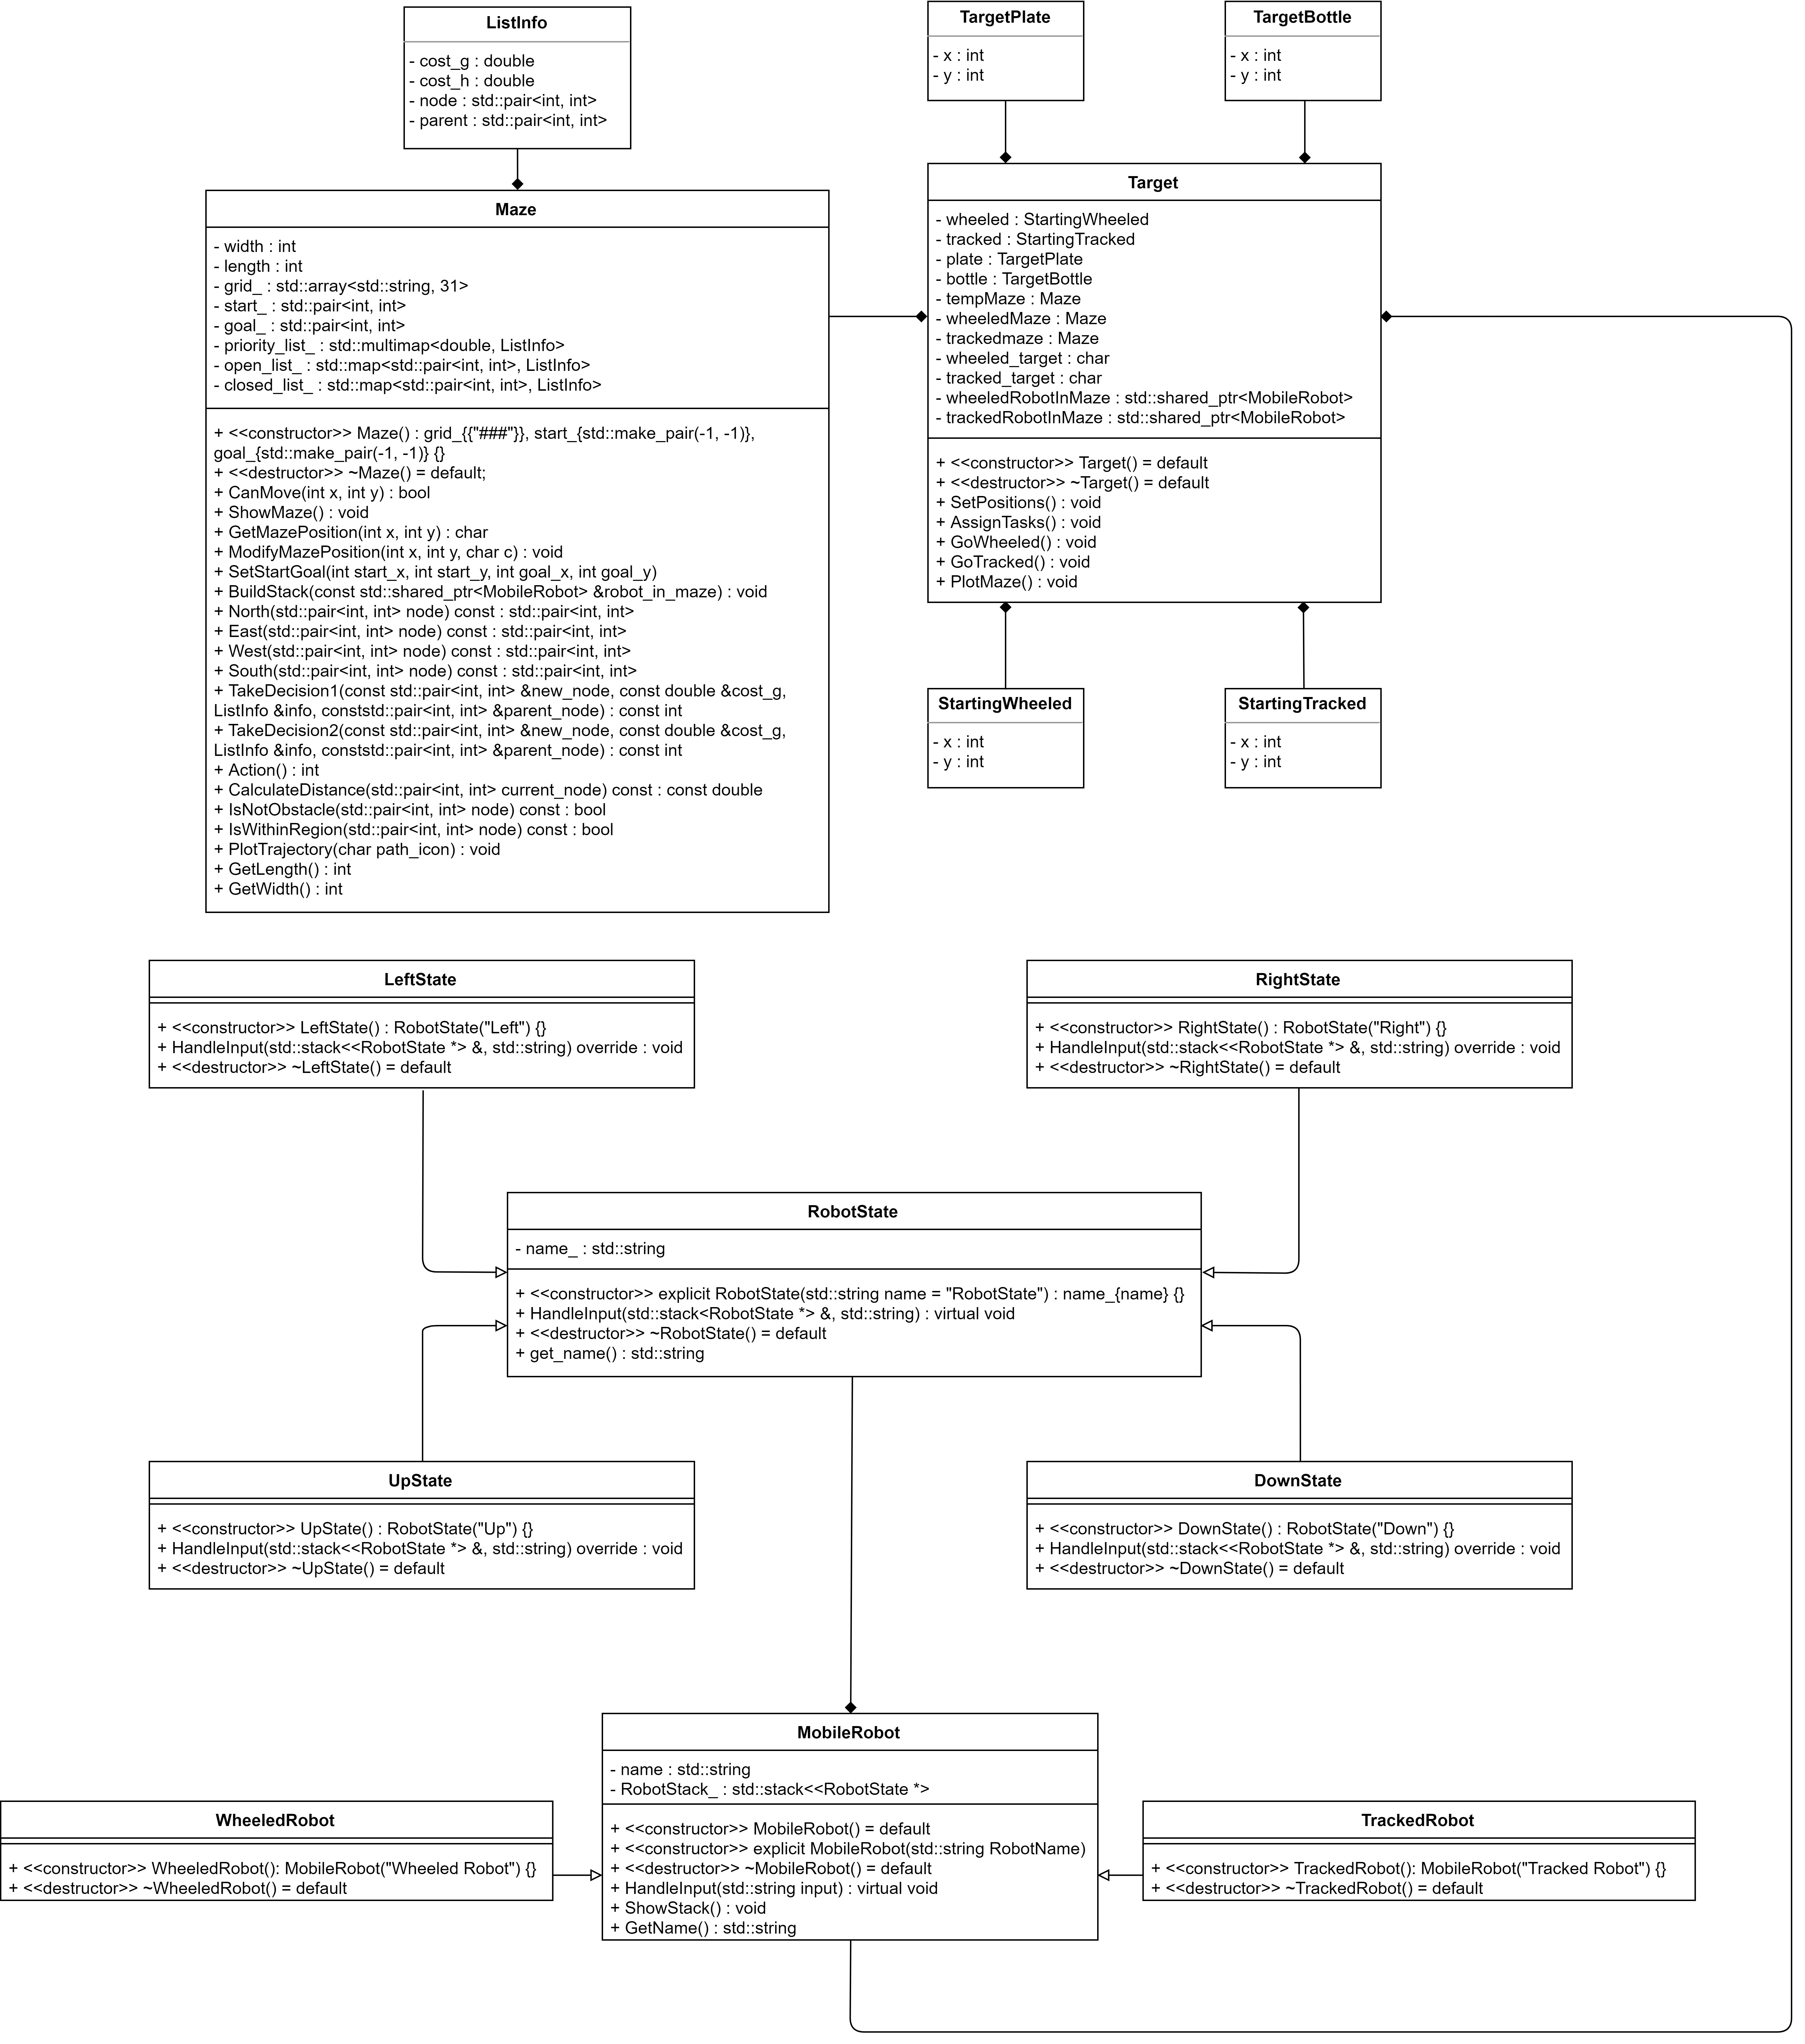 UML Class Diagram for the Project